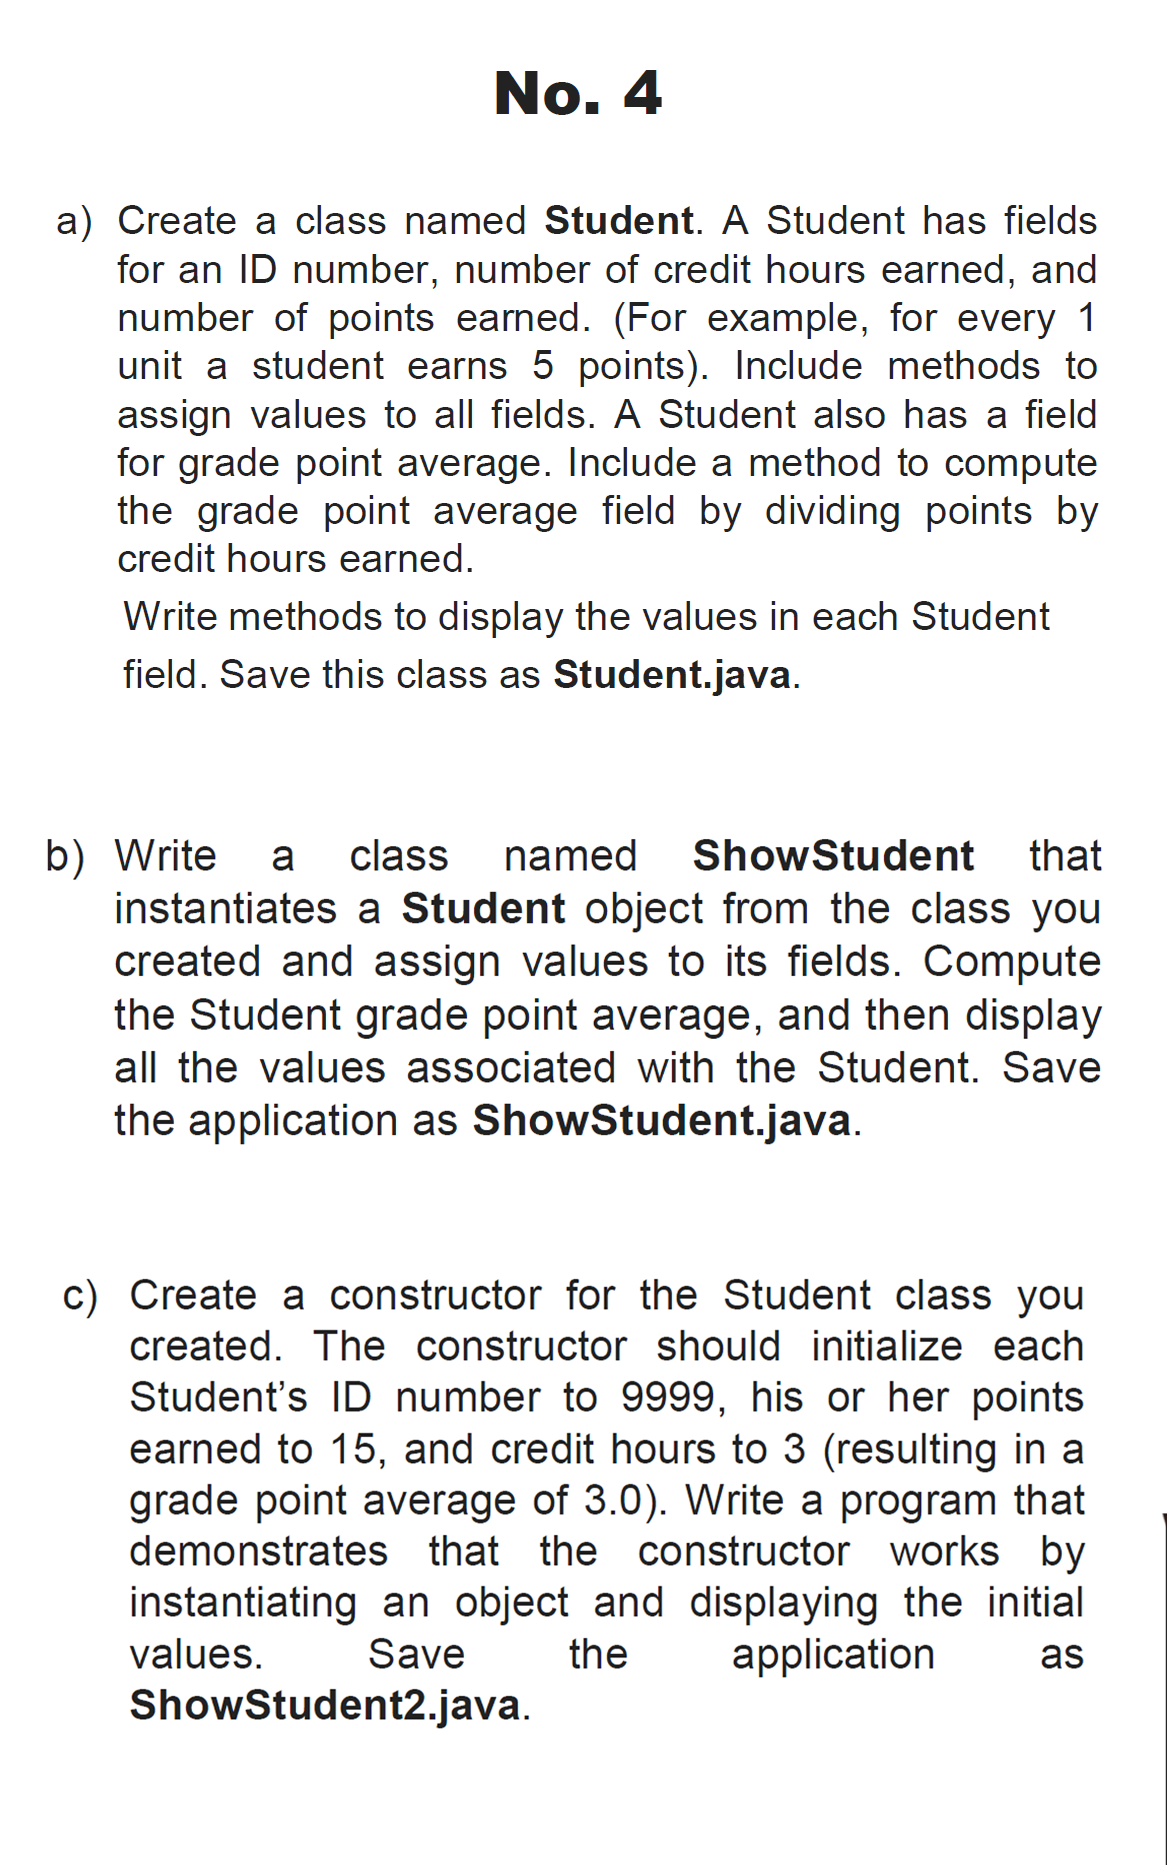 No. 4
a) Create a class named Student. A Student has fields
for an ID number, number of credit hours earned, and
number of points earned. (For example, for every 1
unit a student earns 5 points). Include methods to
assign values to all fields. A Student also has a field
for grade point average. Include a method to compute
the grade point average field by dividing points by
credit hours earned.
Write methods to display the values in each Student
field. Save this class as Student.java.
b) Write
instantiates a Student object from the class you
created and assign values to its fields. Compute
the Student grade point average, and then display
a
class
named
ShowStudent
that
all the values associated with the Student. Save
the application as ShowStudent.java.
c) Create a constructor for the Student class you
created. The constructor should initialize each
Student's ID number to 9999, his or her points
earned to 15, and credit hours to 3 (resulting in a
grade point average of 3.0). Write a program that
demonstrates that the constructor works by
instantiating an object and displaying the initial
values.
Save
the
application
as
ShowStudent2.java.
